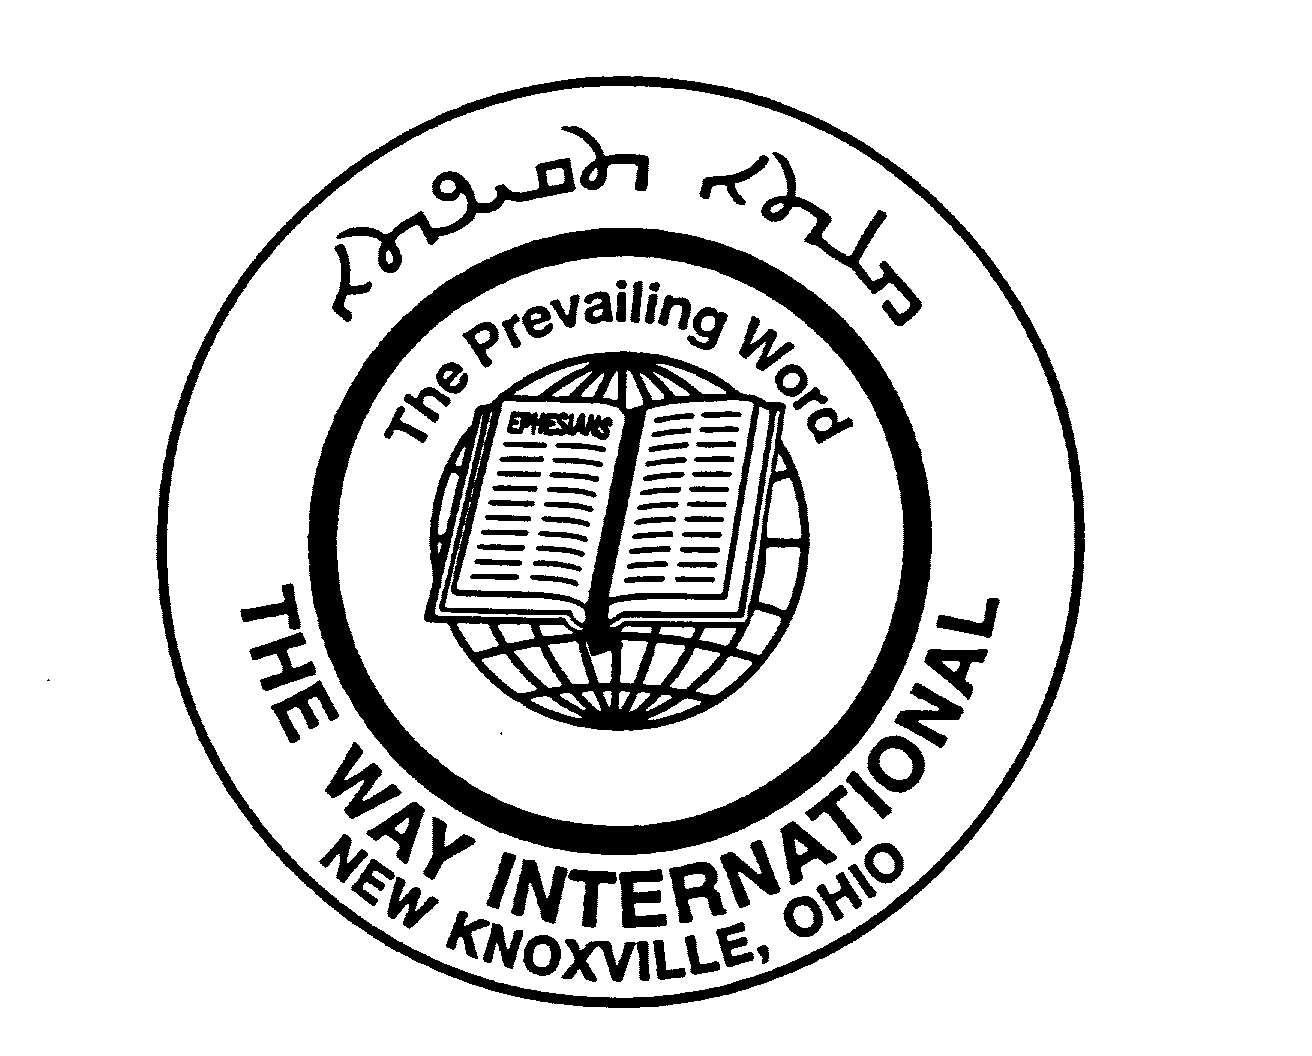 Trademark Logo THE WAY INTERNATIONAL NEW KNOXVILLE, OHIO THE PREVAILING WORD